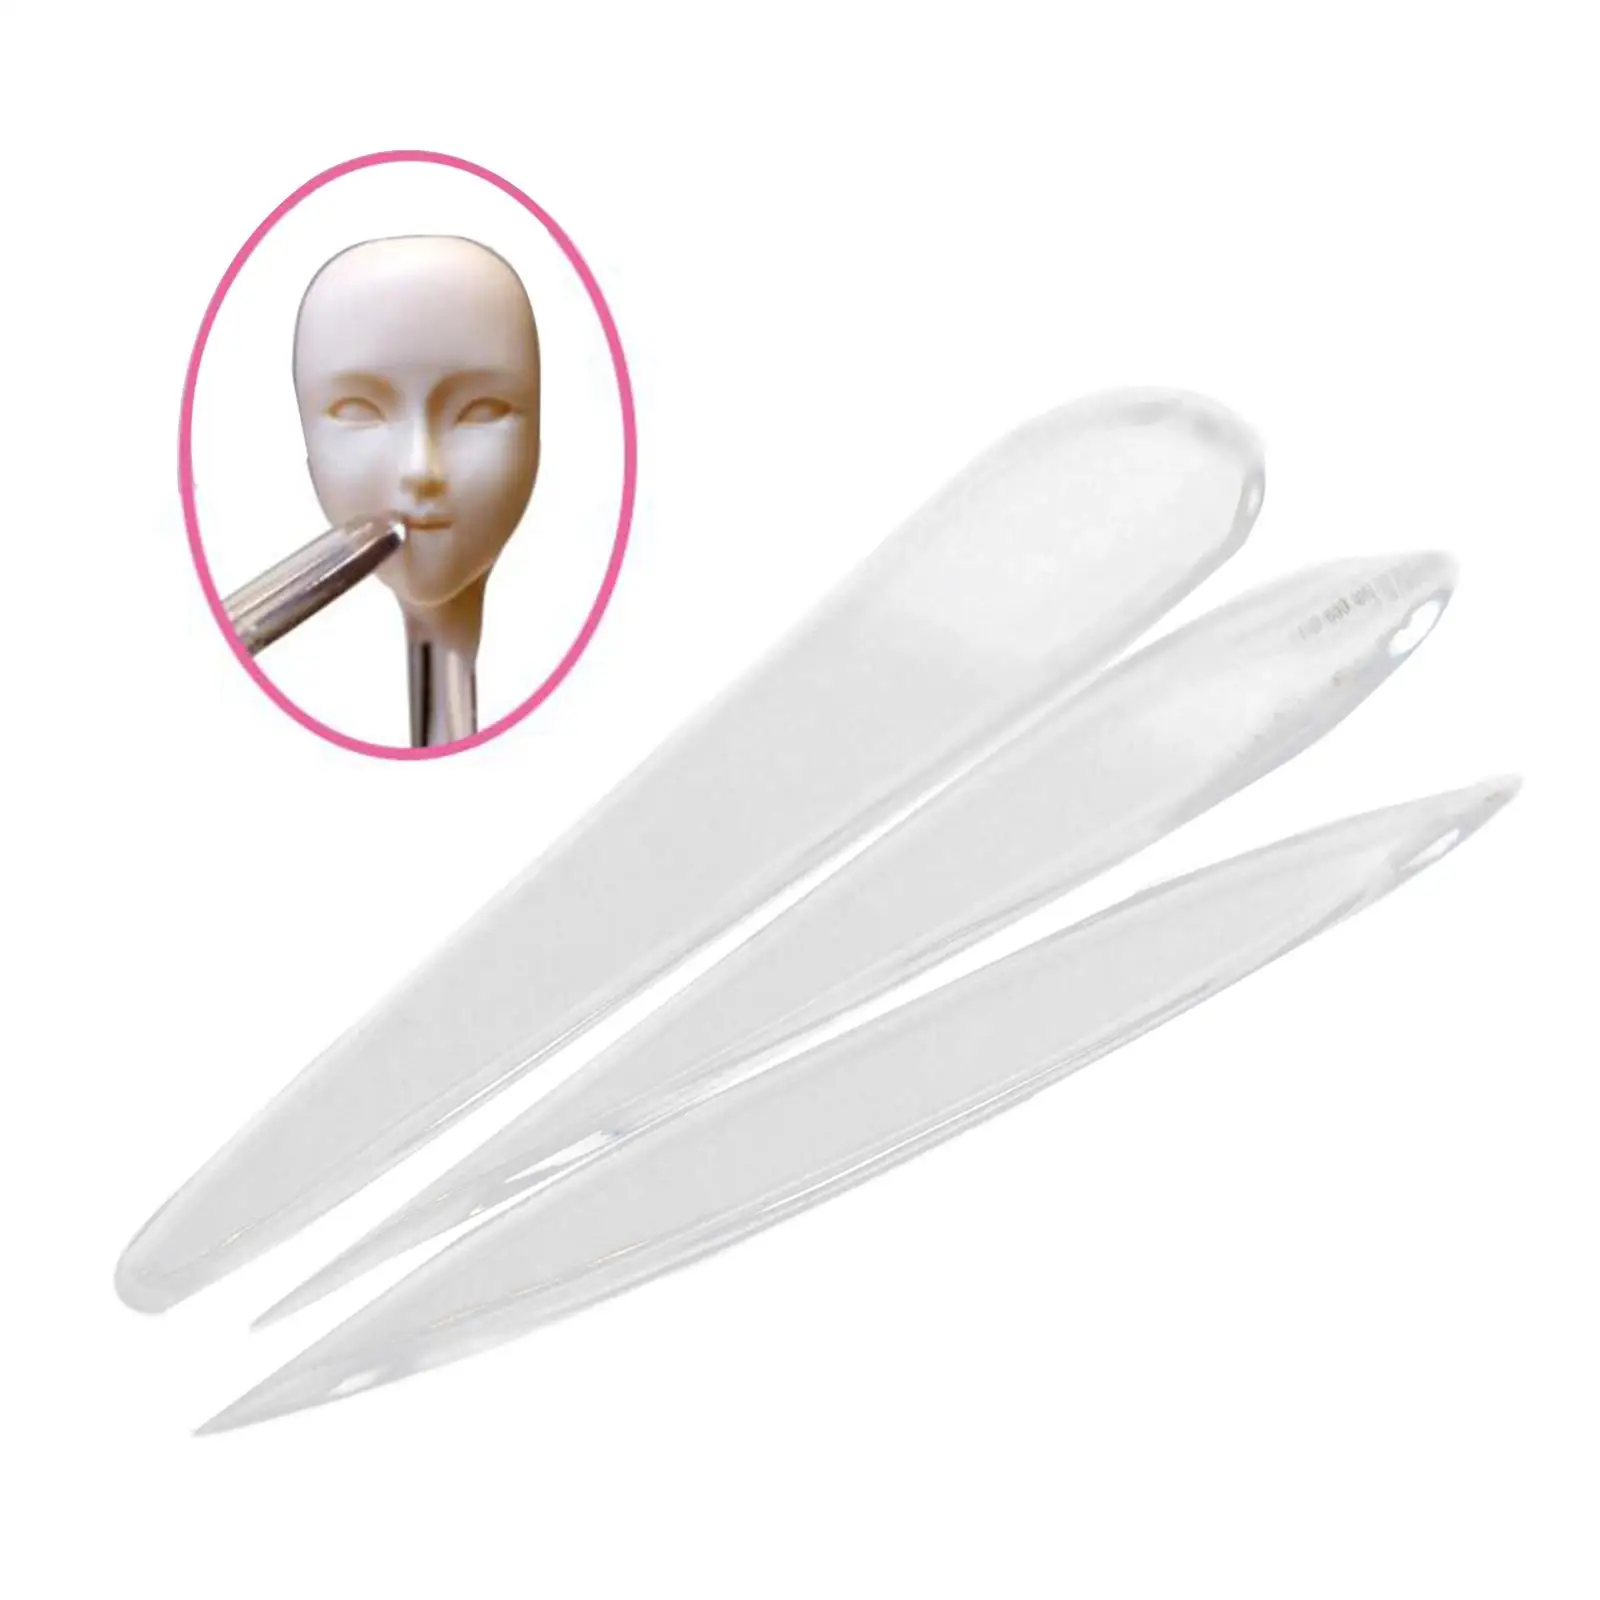 3Pcs Clay Sculpting Tools Acrylic Clear Modeling Tools Polymer Clay Shaping Tools for Carving Enthusiasts Dough Figurines Clay